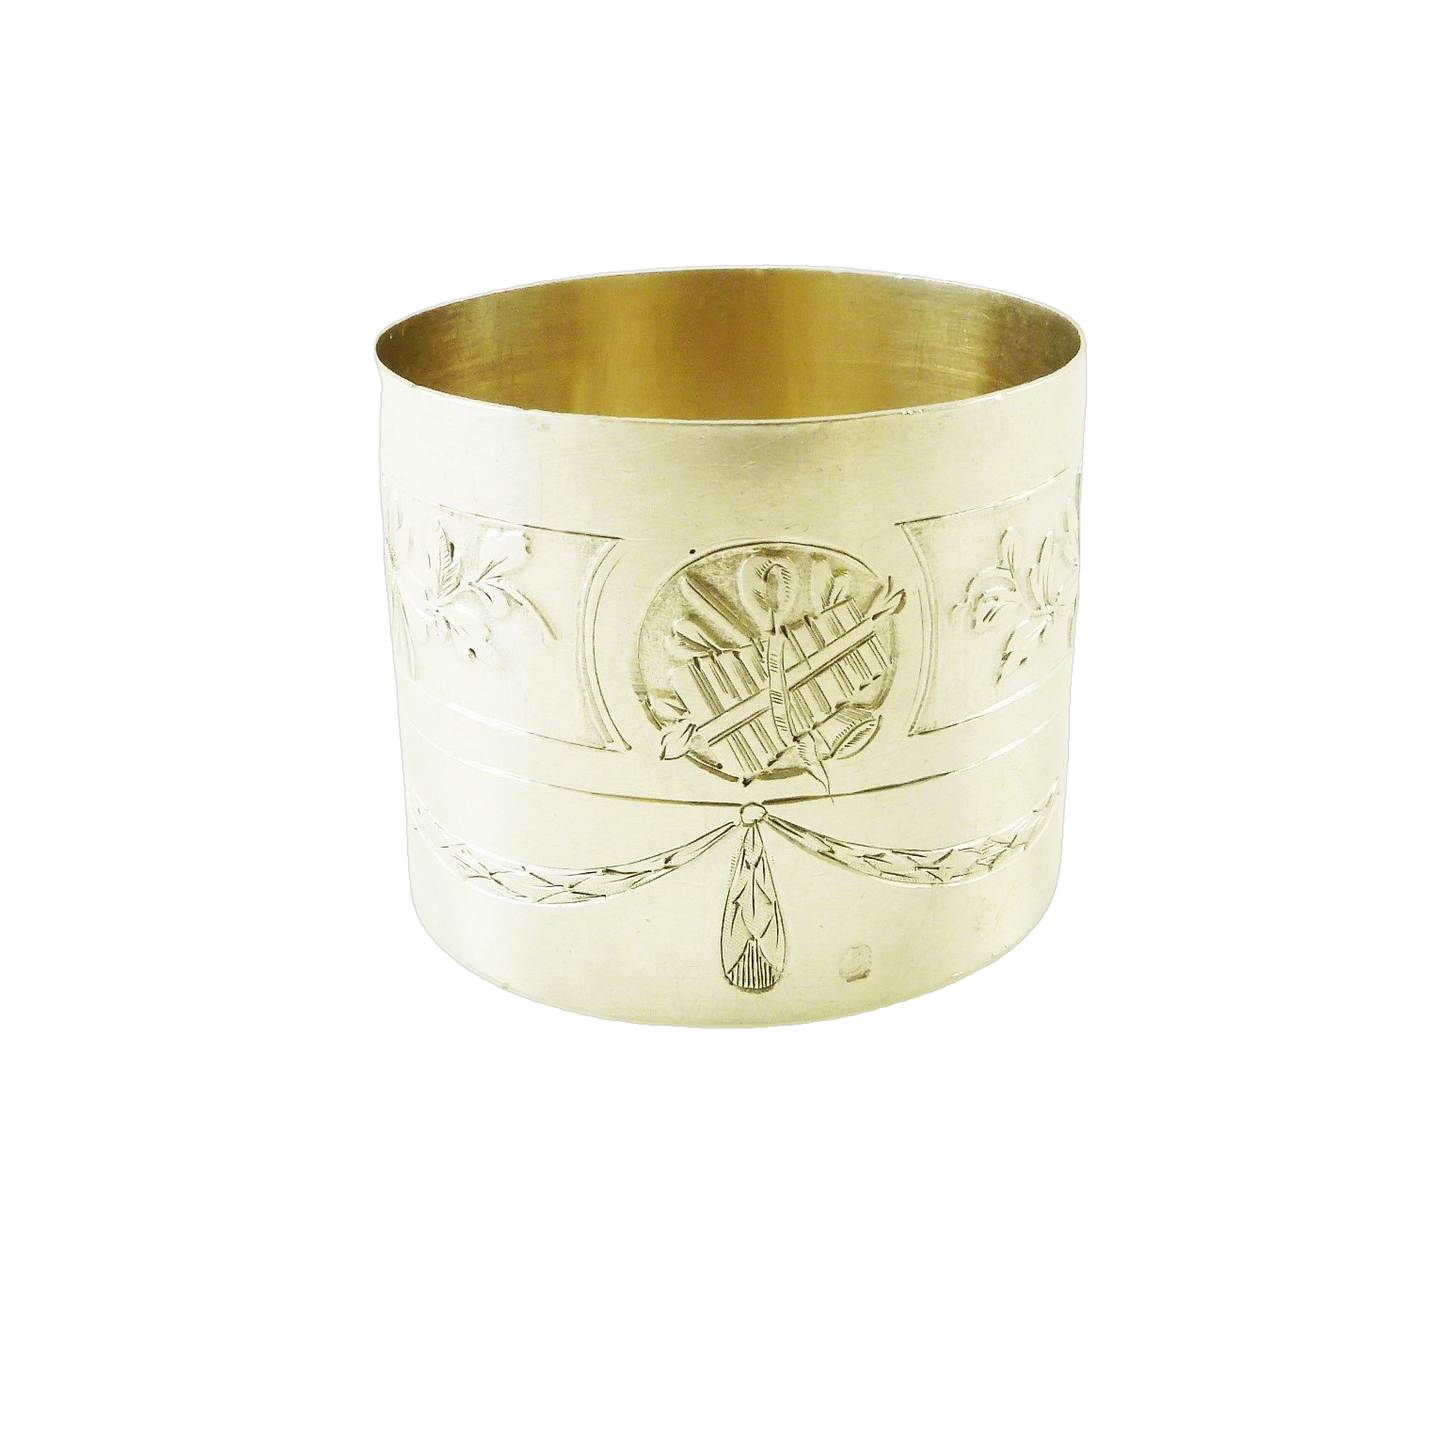 Antique French Sterling Silver Napkin Ring, Neoclassic and Art Deco Styling - 43 Chesapeake Court Antiques